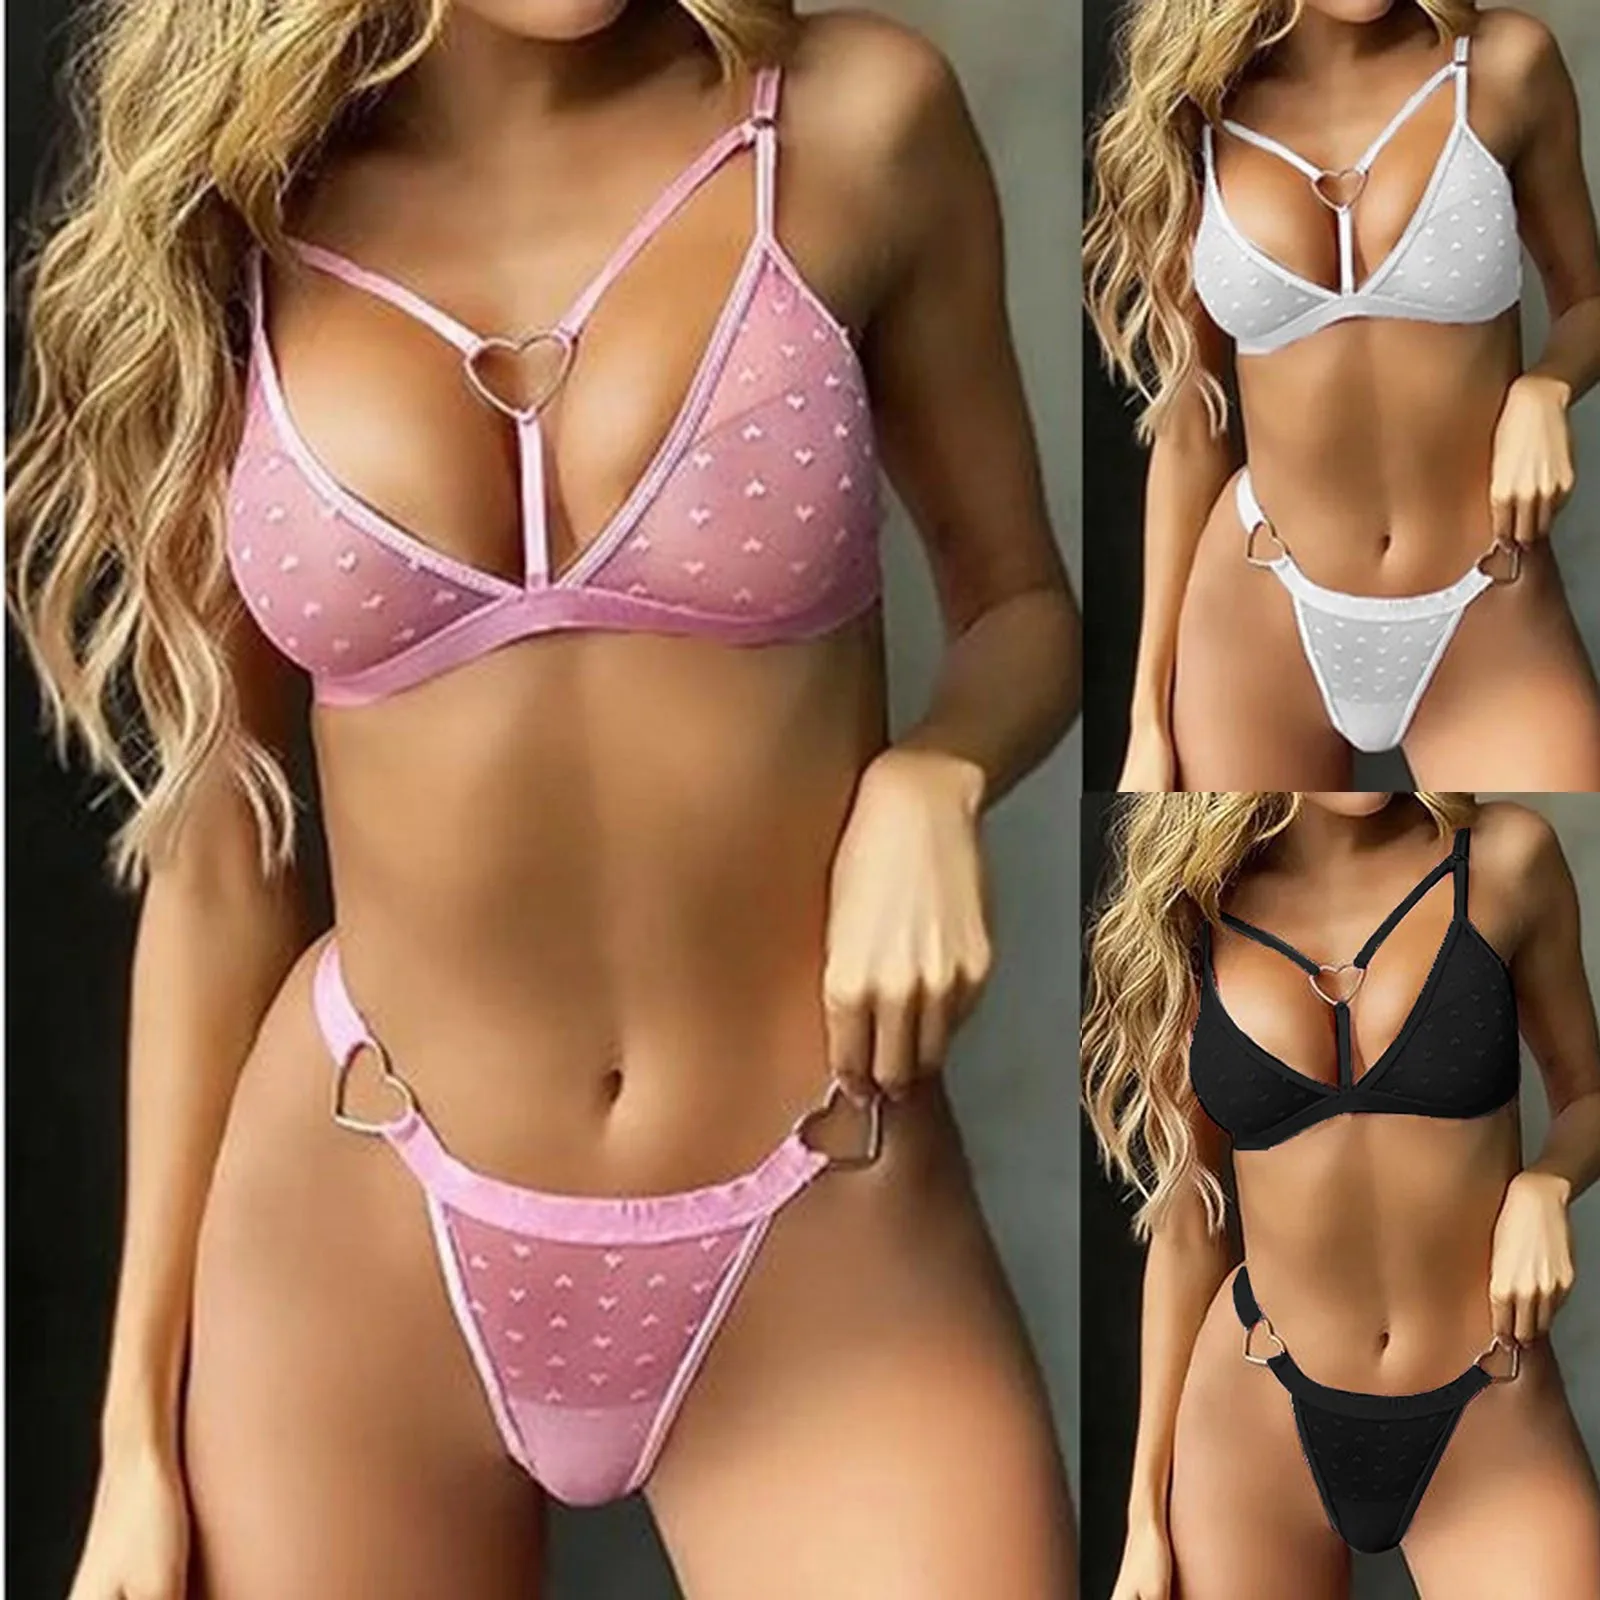 Sexinew - Sexi New Year Ladies Transparent Lace Sexy Lace Bra Underwear Female Sex  Lace Dress Porno Erotic Lingerie ÑÐµÐºÑÑƒÐ°Ð»ÑŒÐ½Ð¾Ðµ Ð±ÐµÐ»ÑŒÐµ _ - AliExpress Mobile